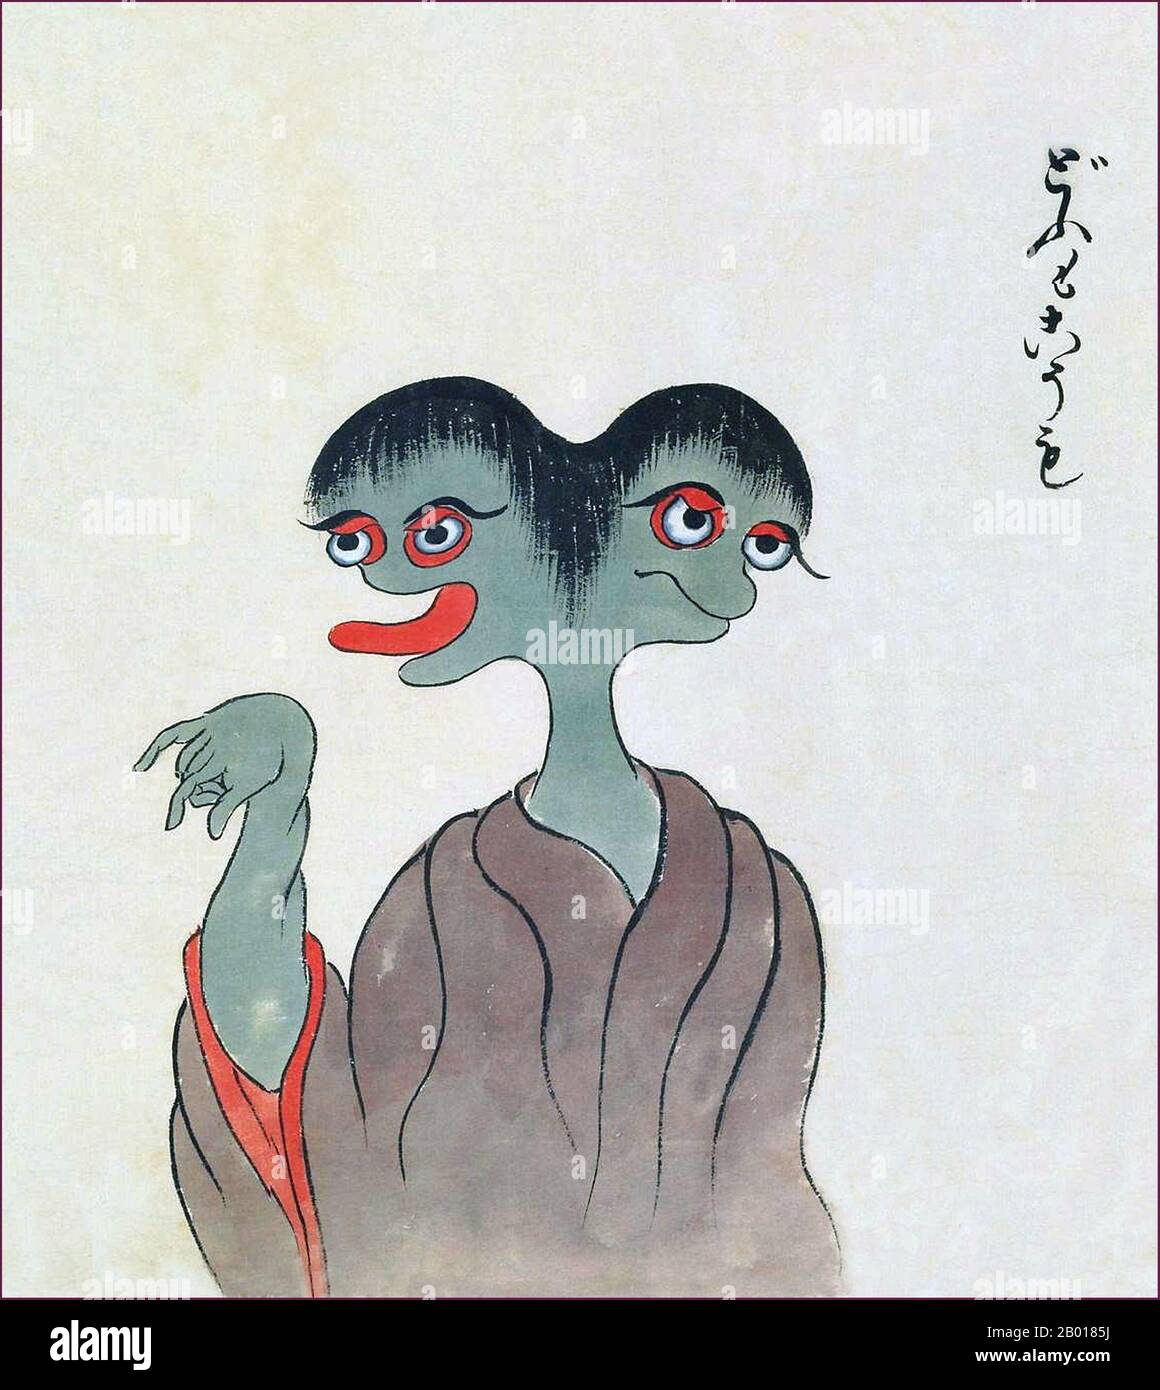 Japan: The Dōmo-kōmo is a two-headed creature with gray skin. From the Bakemono Zukushi Monster Scroll, Edo Period (1603-1868), 18th-19th century.  The Bakemono Zukushi handscroll, painted in the Edo period (18th-19th century) by an unknown artist, depicts 24 traditional monsters that traditionally haunt people and localities in Japan. Stock Photo